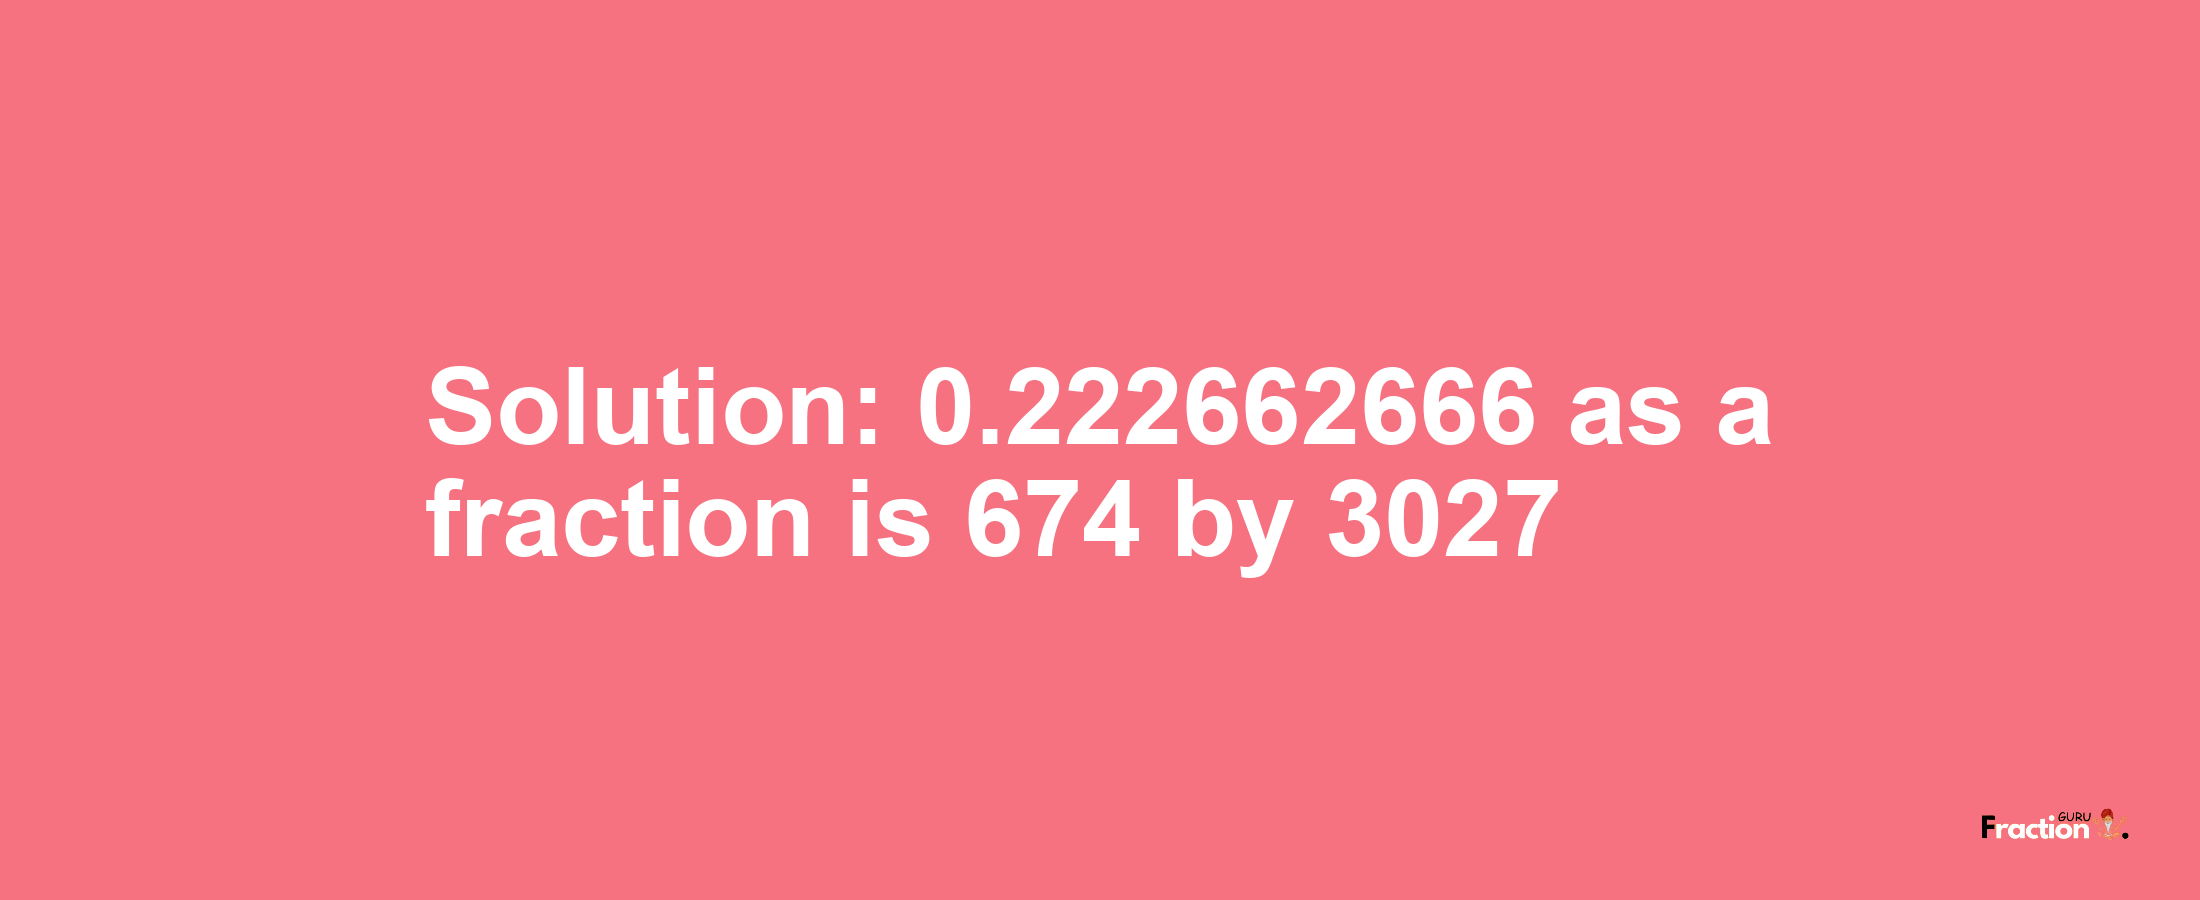 Solution:0.222662666 as a fraction is 674/3027